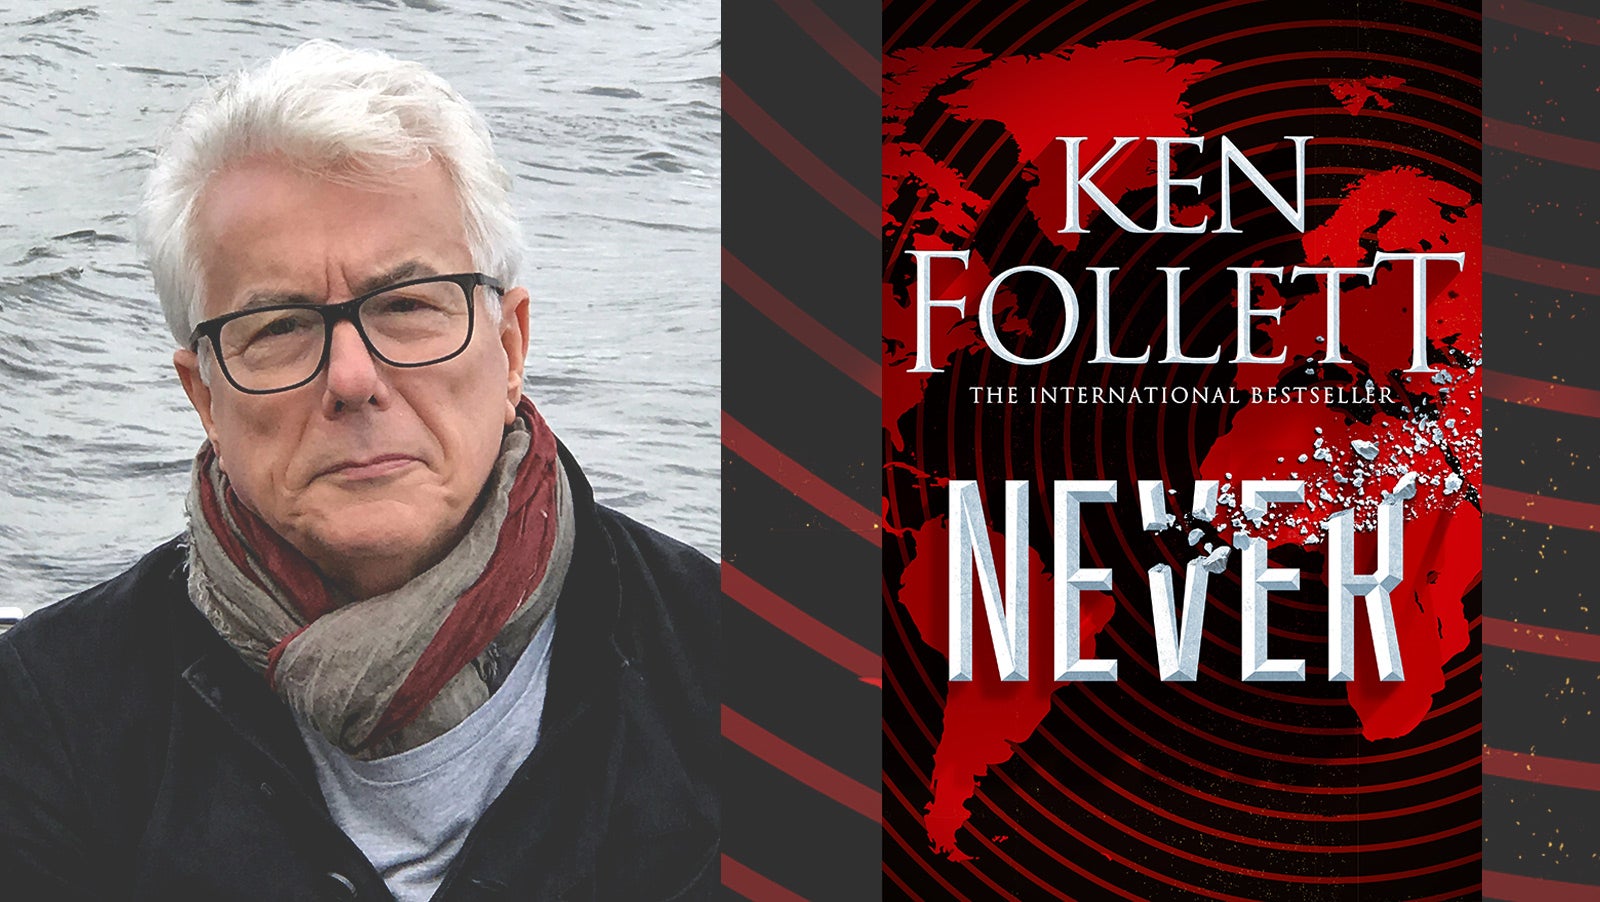 Photograph of ken Follett in warm winter clothing with a grey sea in the background, next to an image of the book cover for his forthcoming novel Never, which shows a world map covered in black and red.